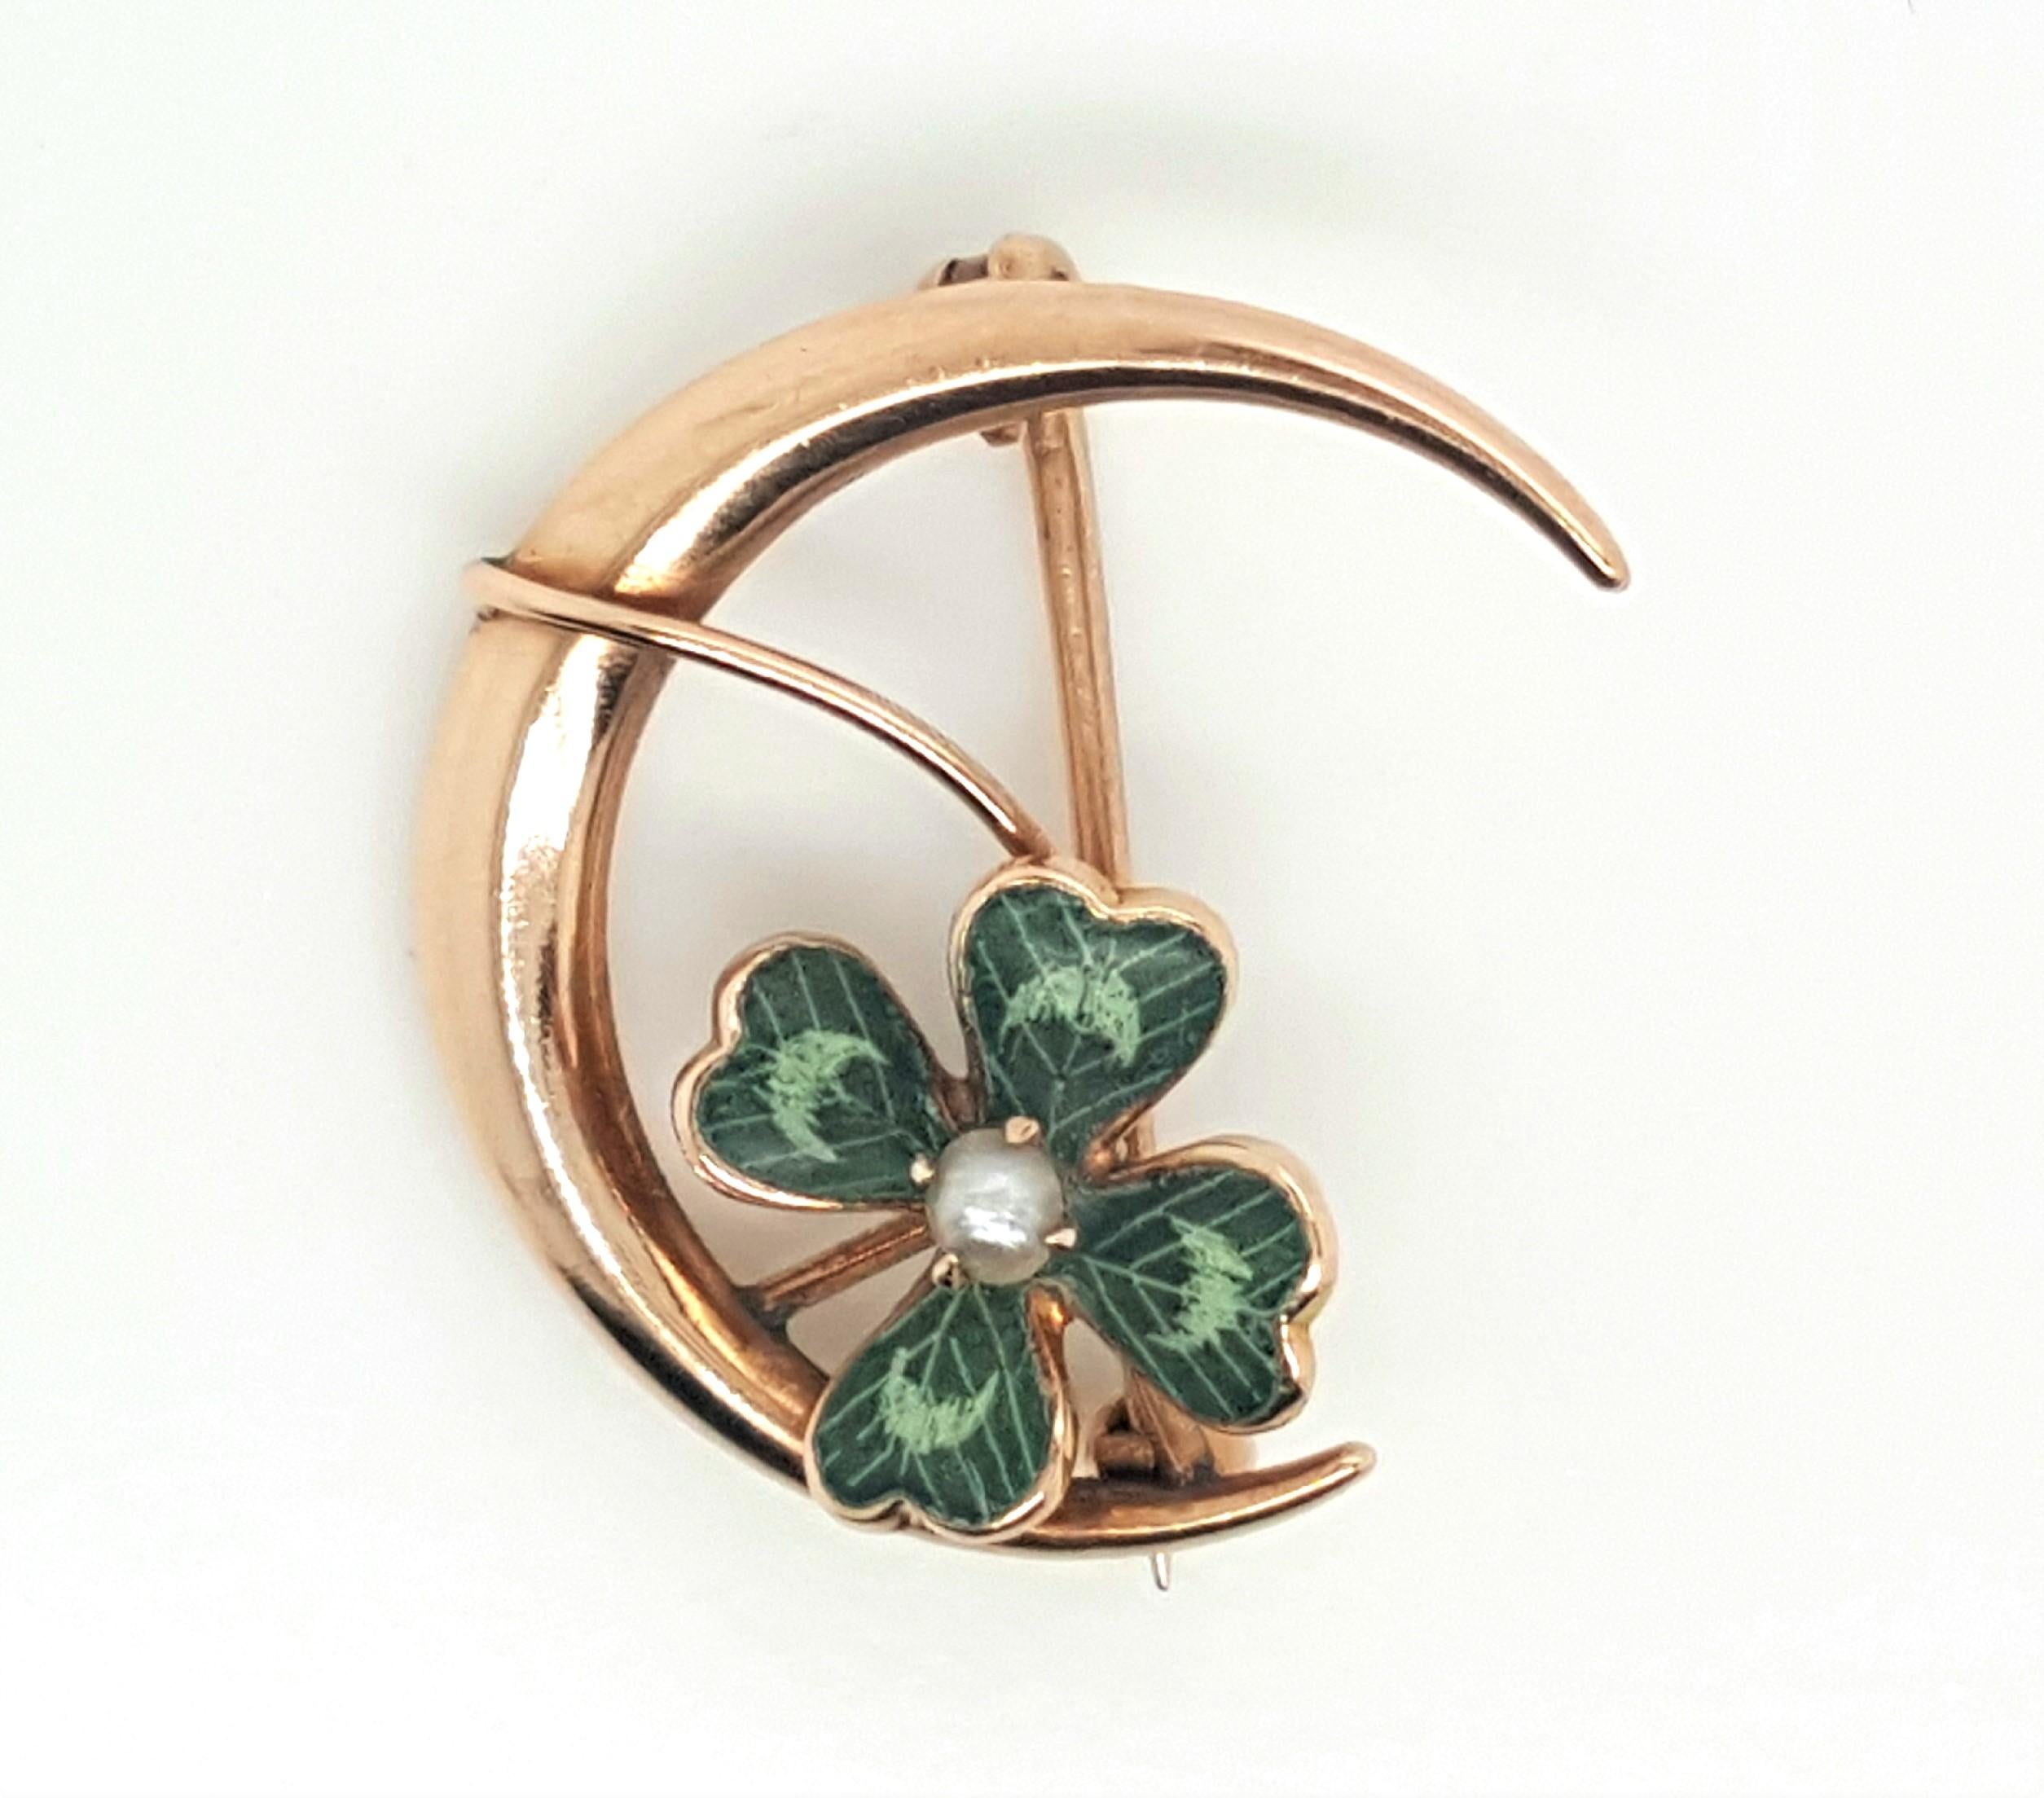 Art Nouveau 10 karat yellow gold brooch designed as a crescent moon featuring an enameled four leaf clover sweeping across the center, accented by half pearl.  A pinstem and C catch complete the reverse. The brooch weighs 1.32 grams.  Dimensions: